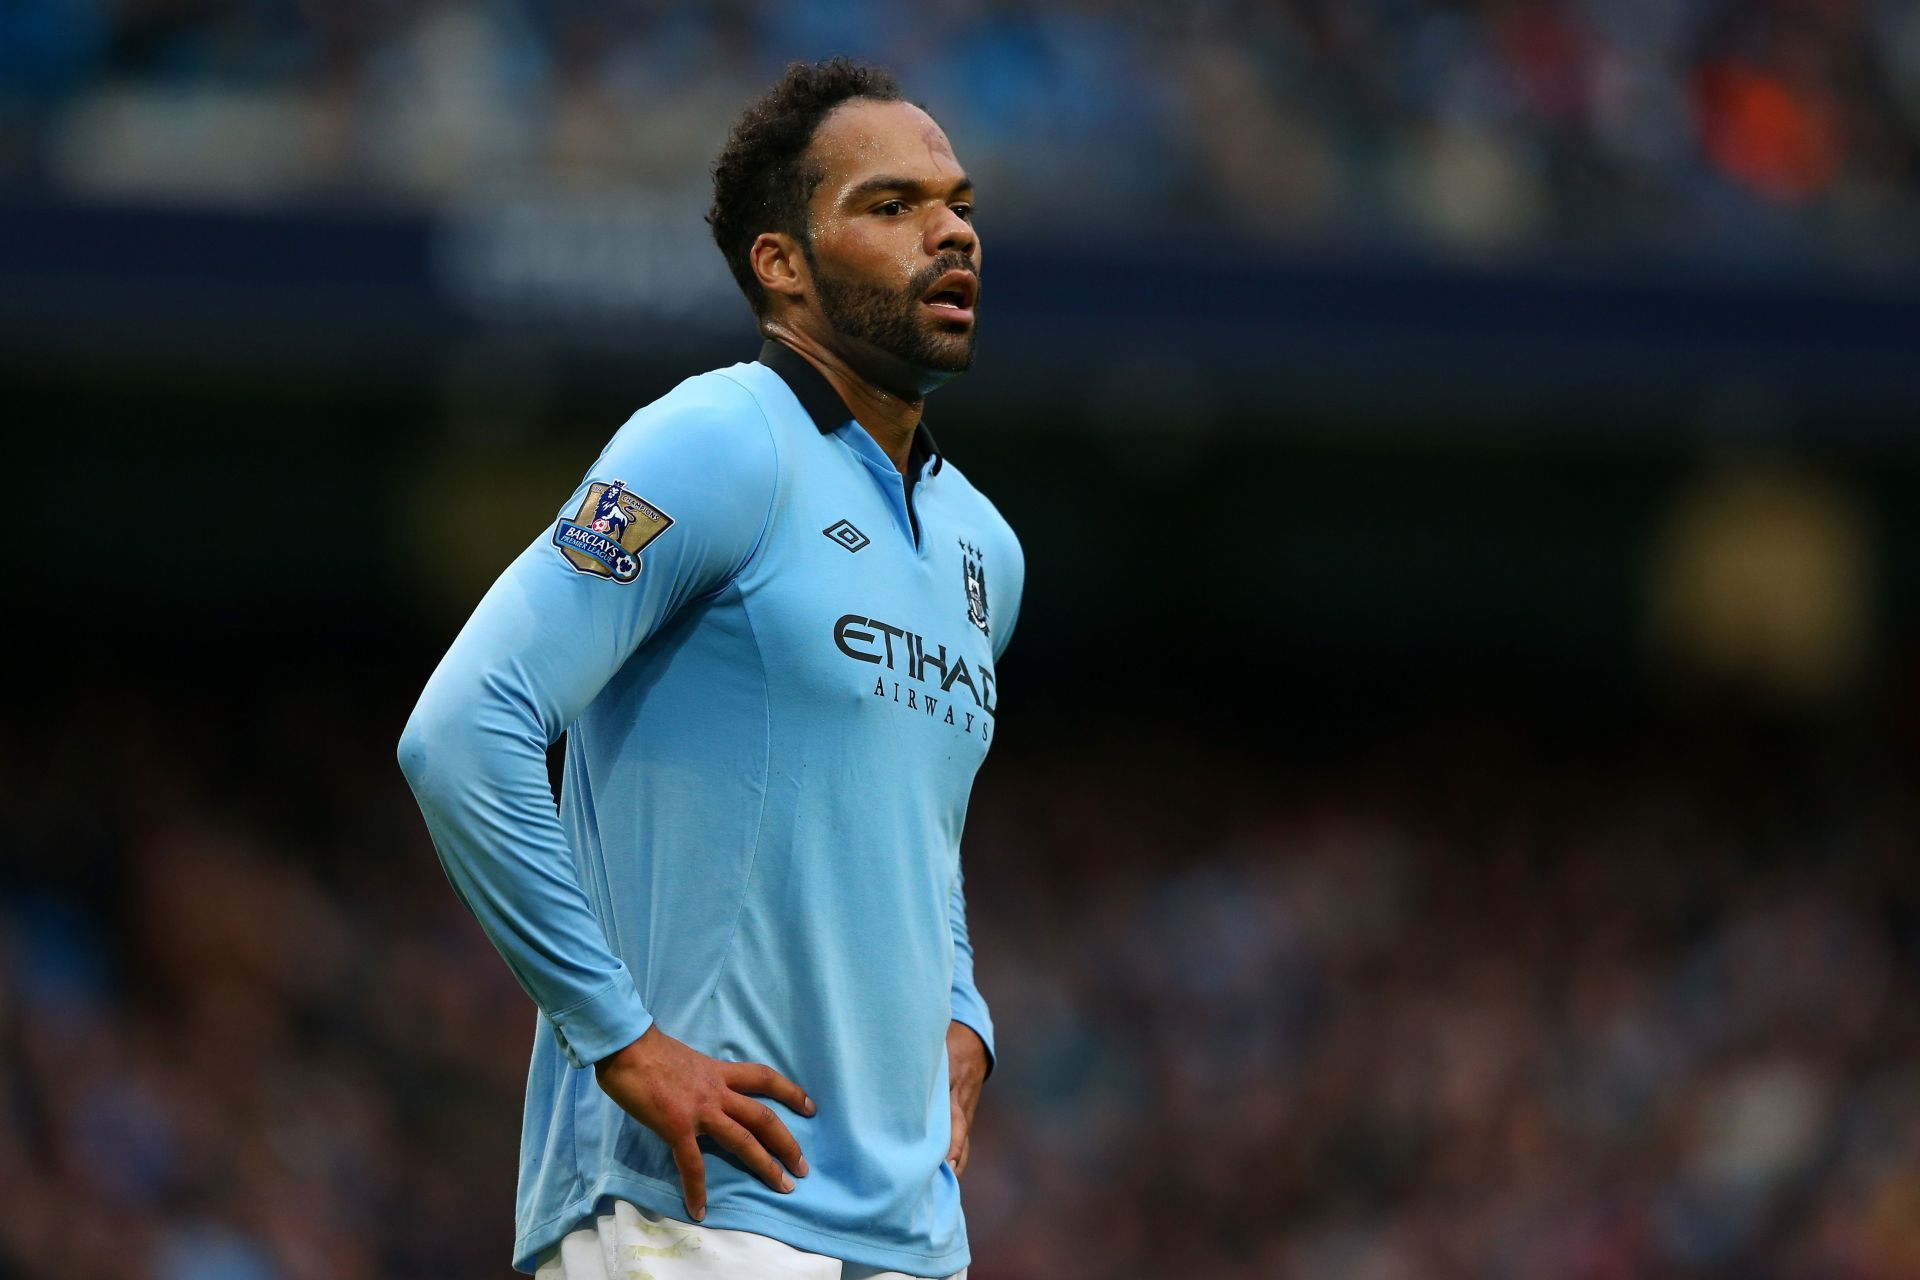 Lescott formed a solid partnership with Vincent Kompany at City